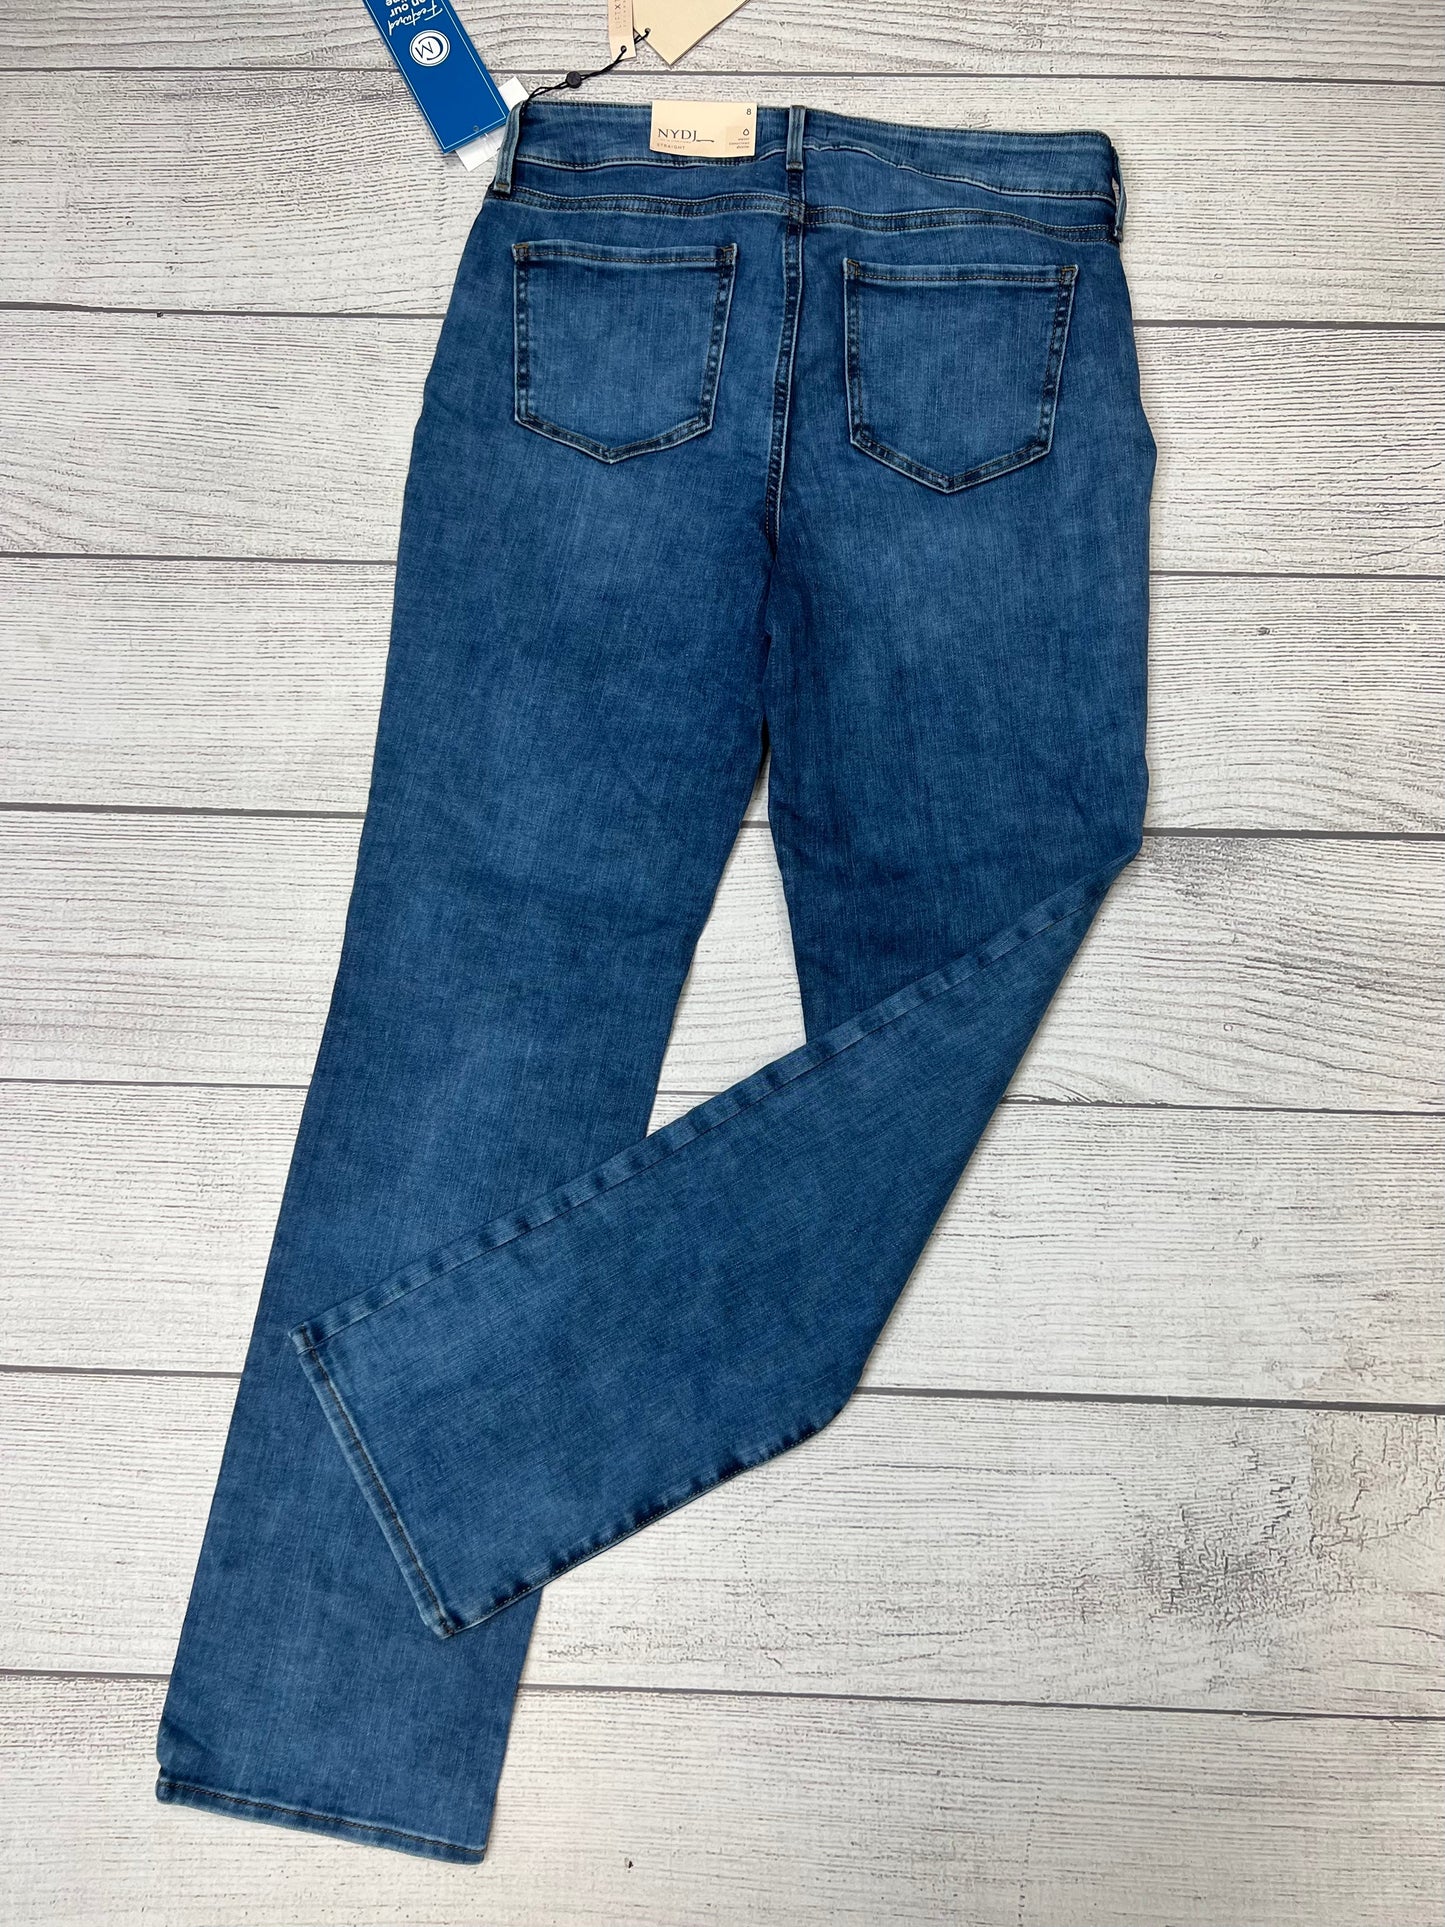 Blue Jeans Designer Not Your Daughters Jeans, Size 8